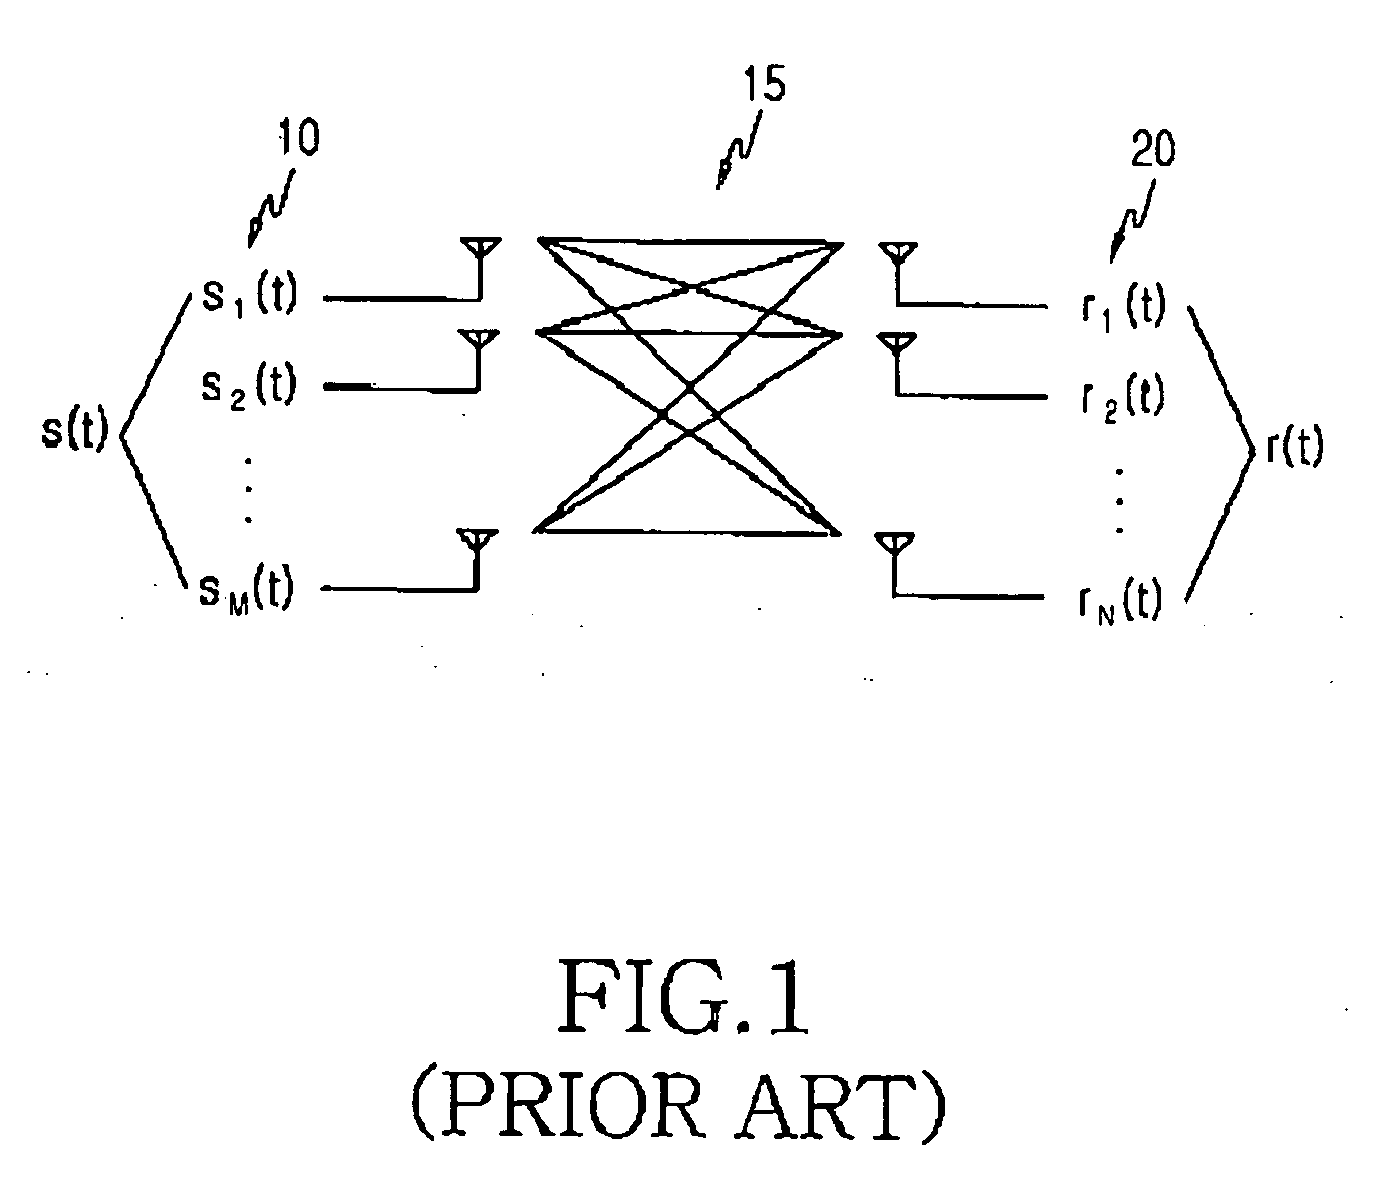 Method and apparatus for determining a shuffling pattern based on a minimum signal to noise ratio in a double space-time transmit diversity system